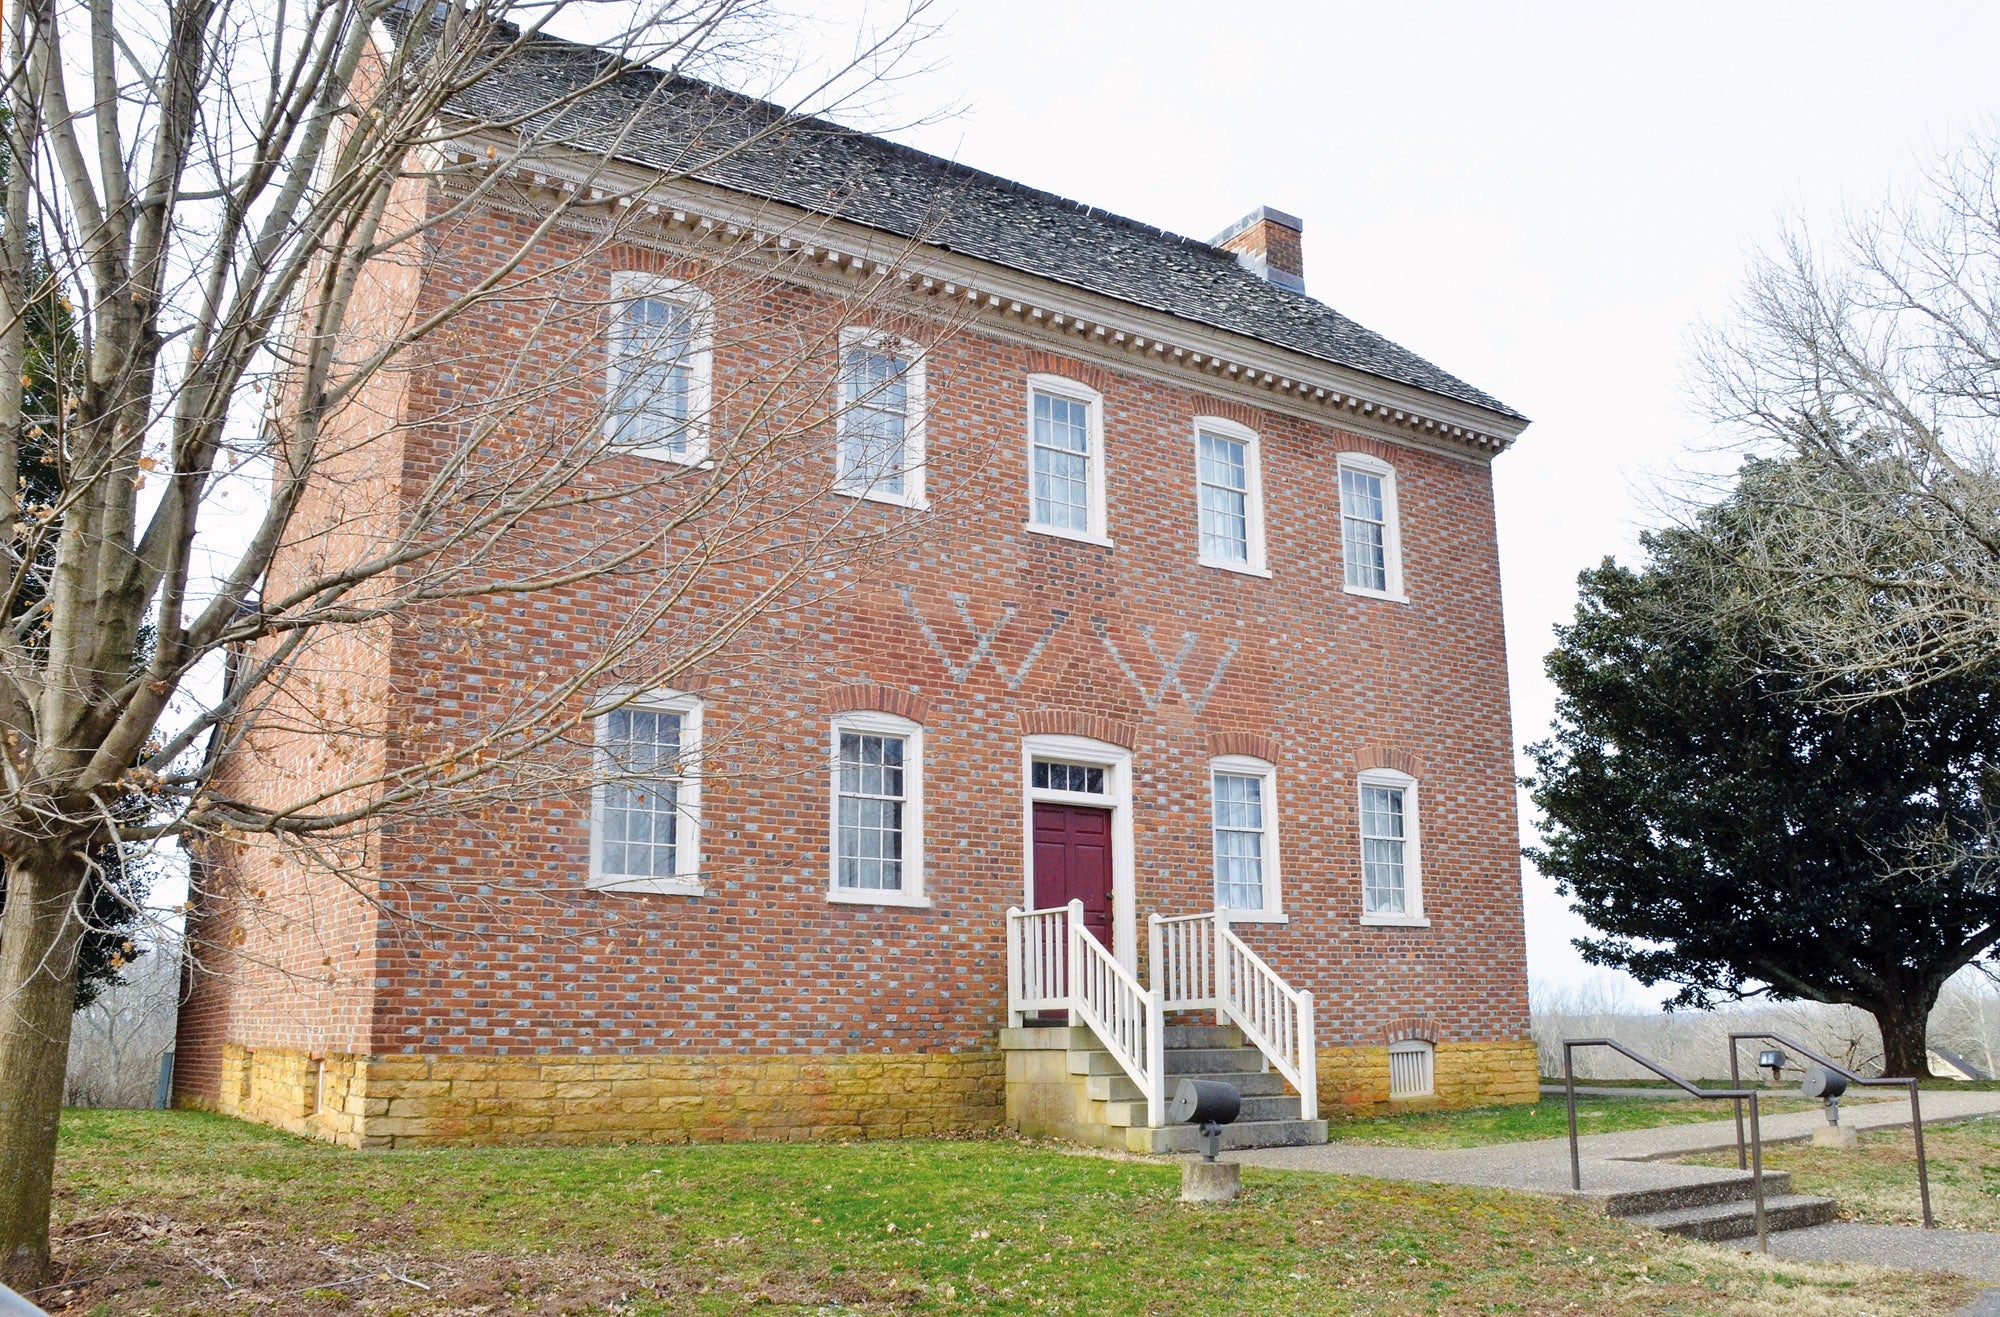 Lincoln County takes ownership of William Whitley House property The